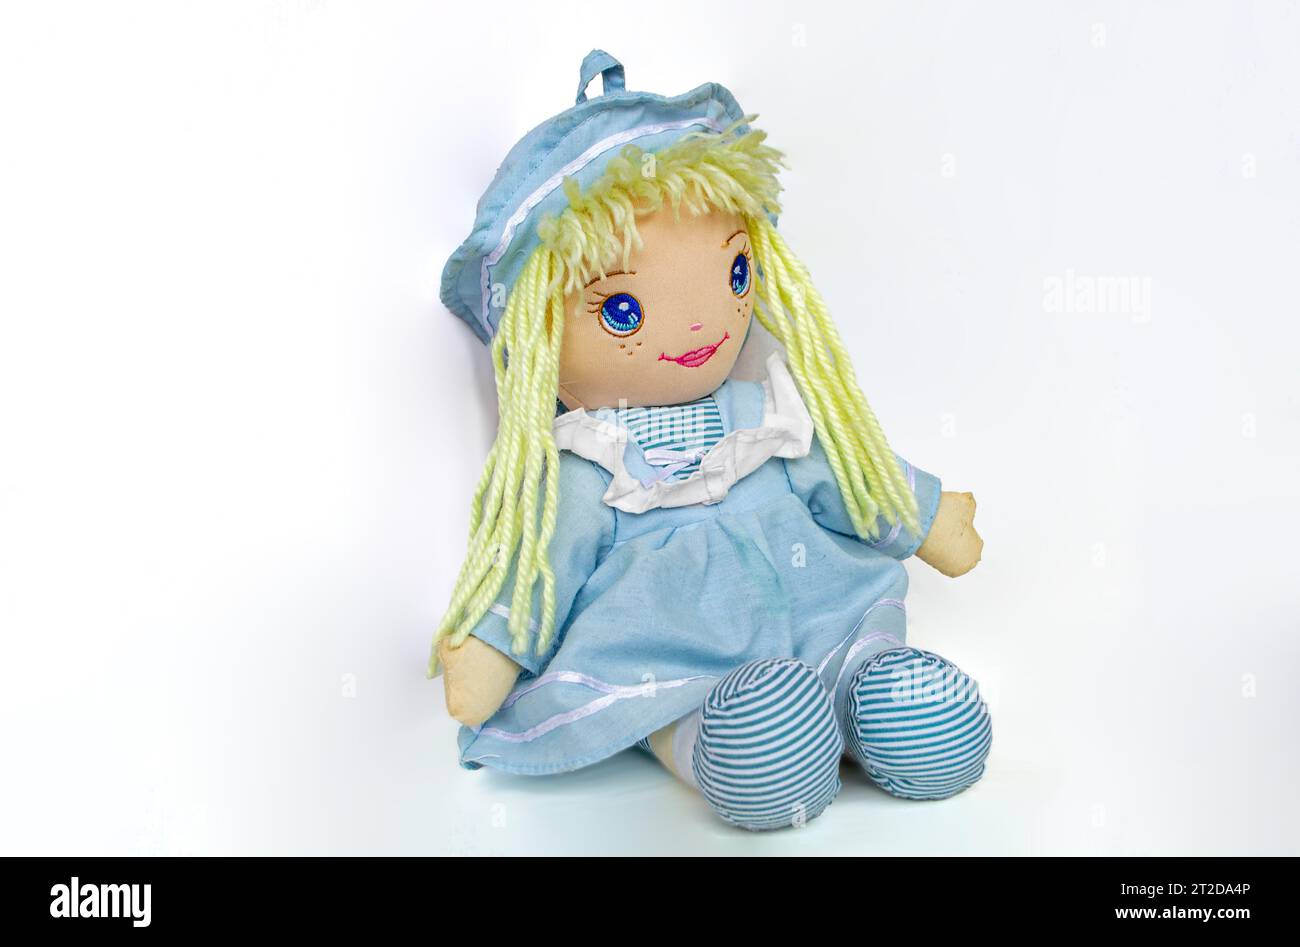 Handmade doll girl, made of fabric, painted with acrylic paints. High quality photo Stock Photo